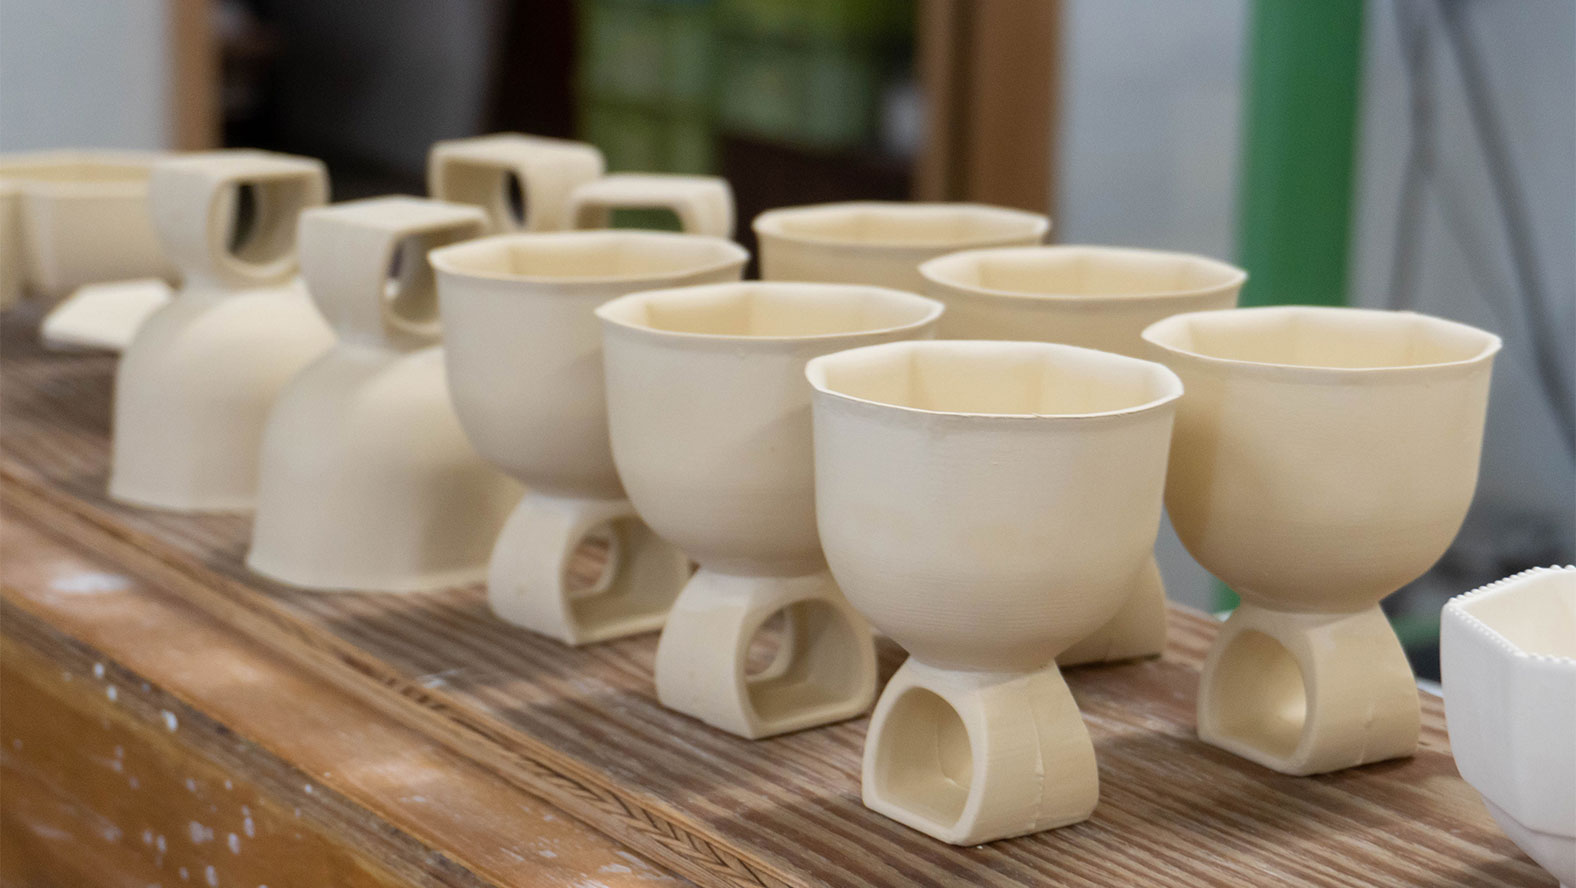 Digital Tools Inspire New Forms of Pottery